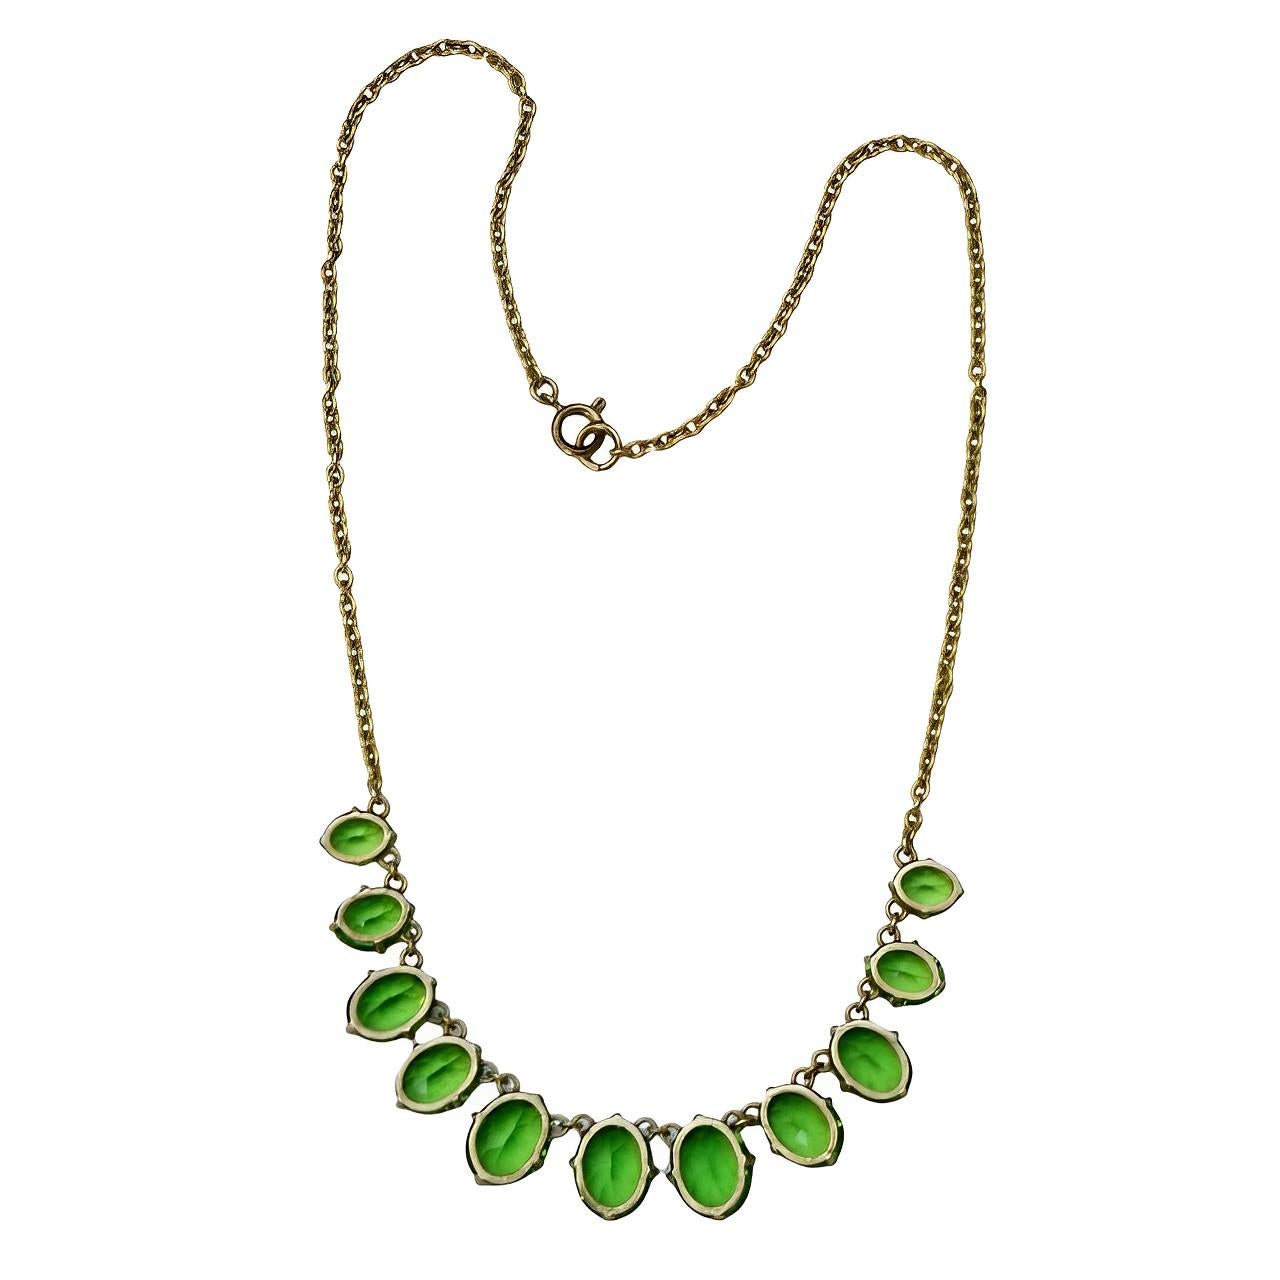 Art Deco Gold Plated Necklace with Apple Green Paste Stone Drops circa 1930s For Sale 1